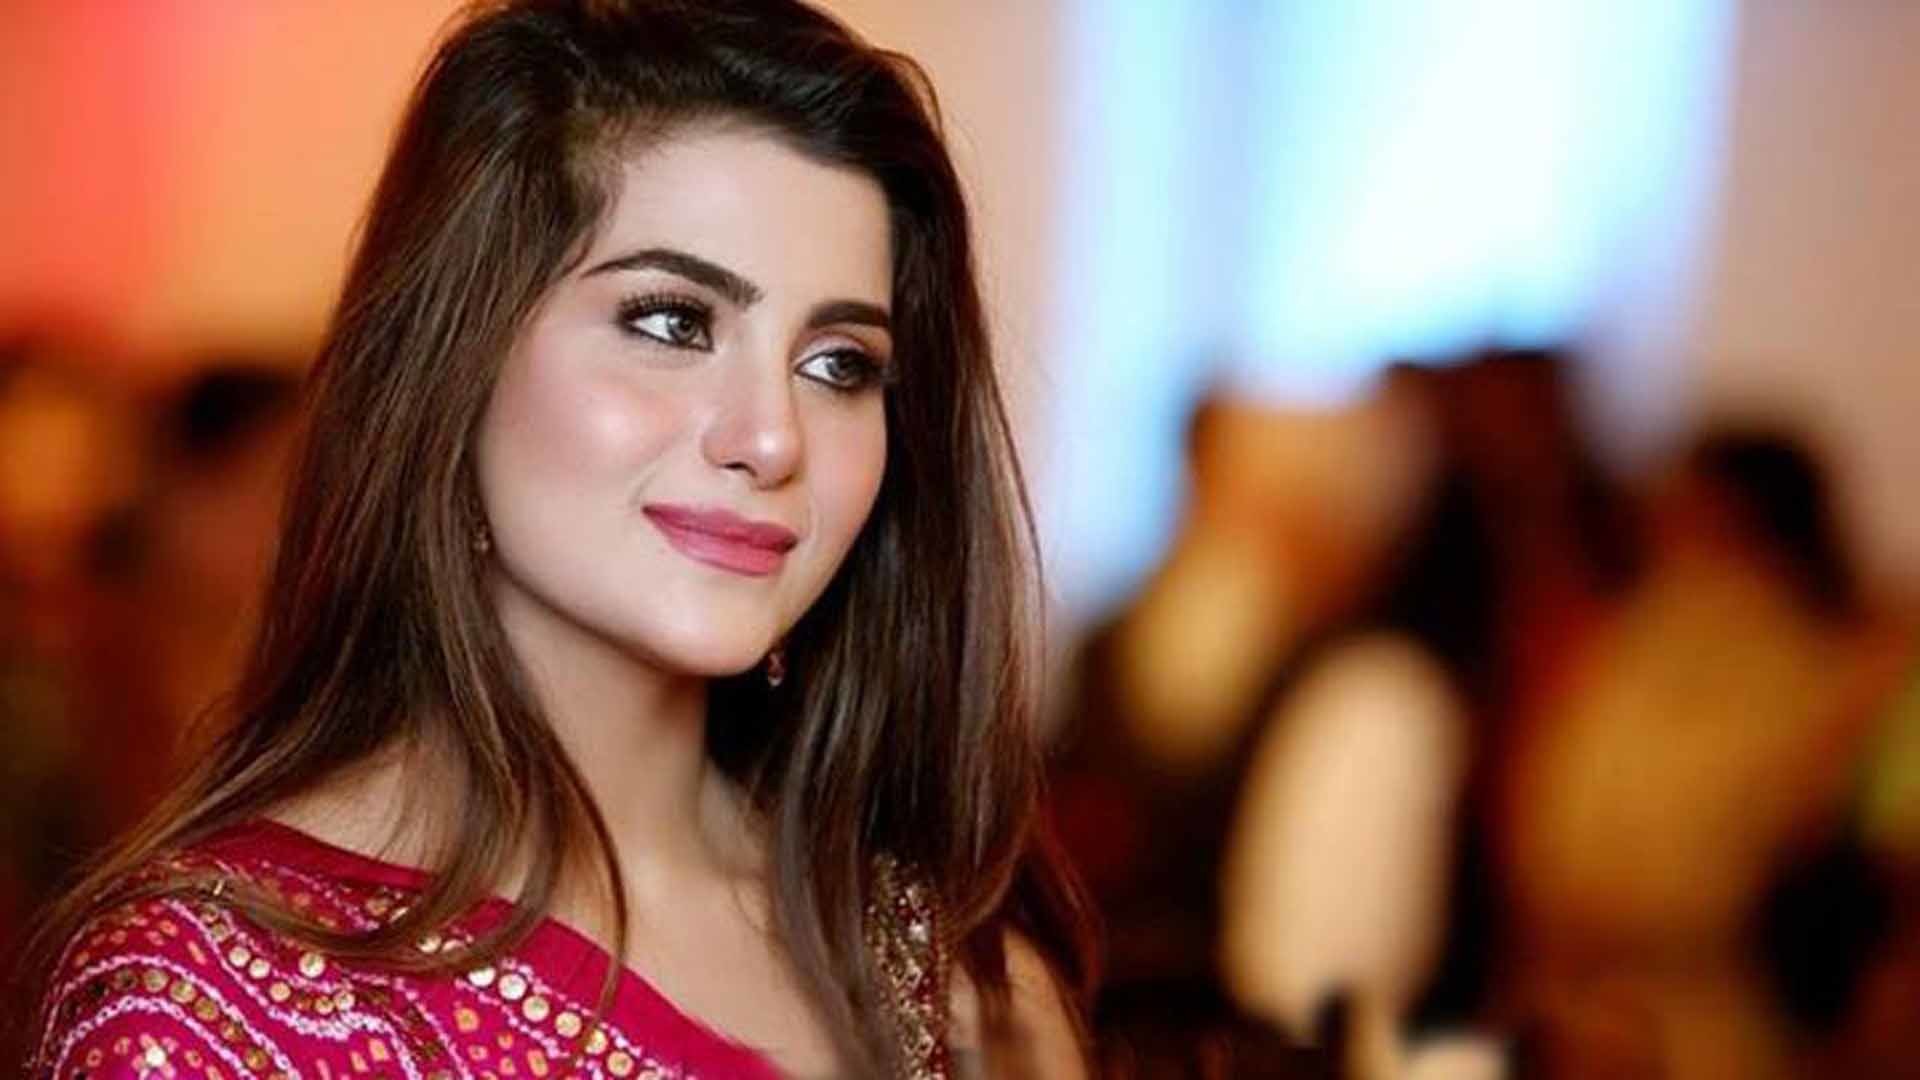 Top 10 Most Beautiful Pakistani Women In the World - Youme 